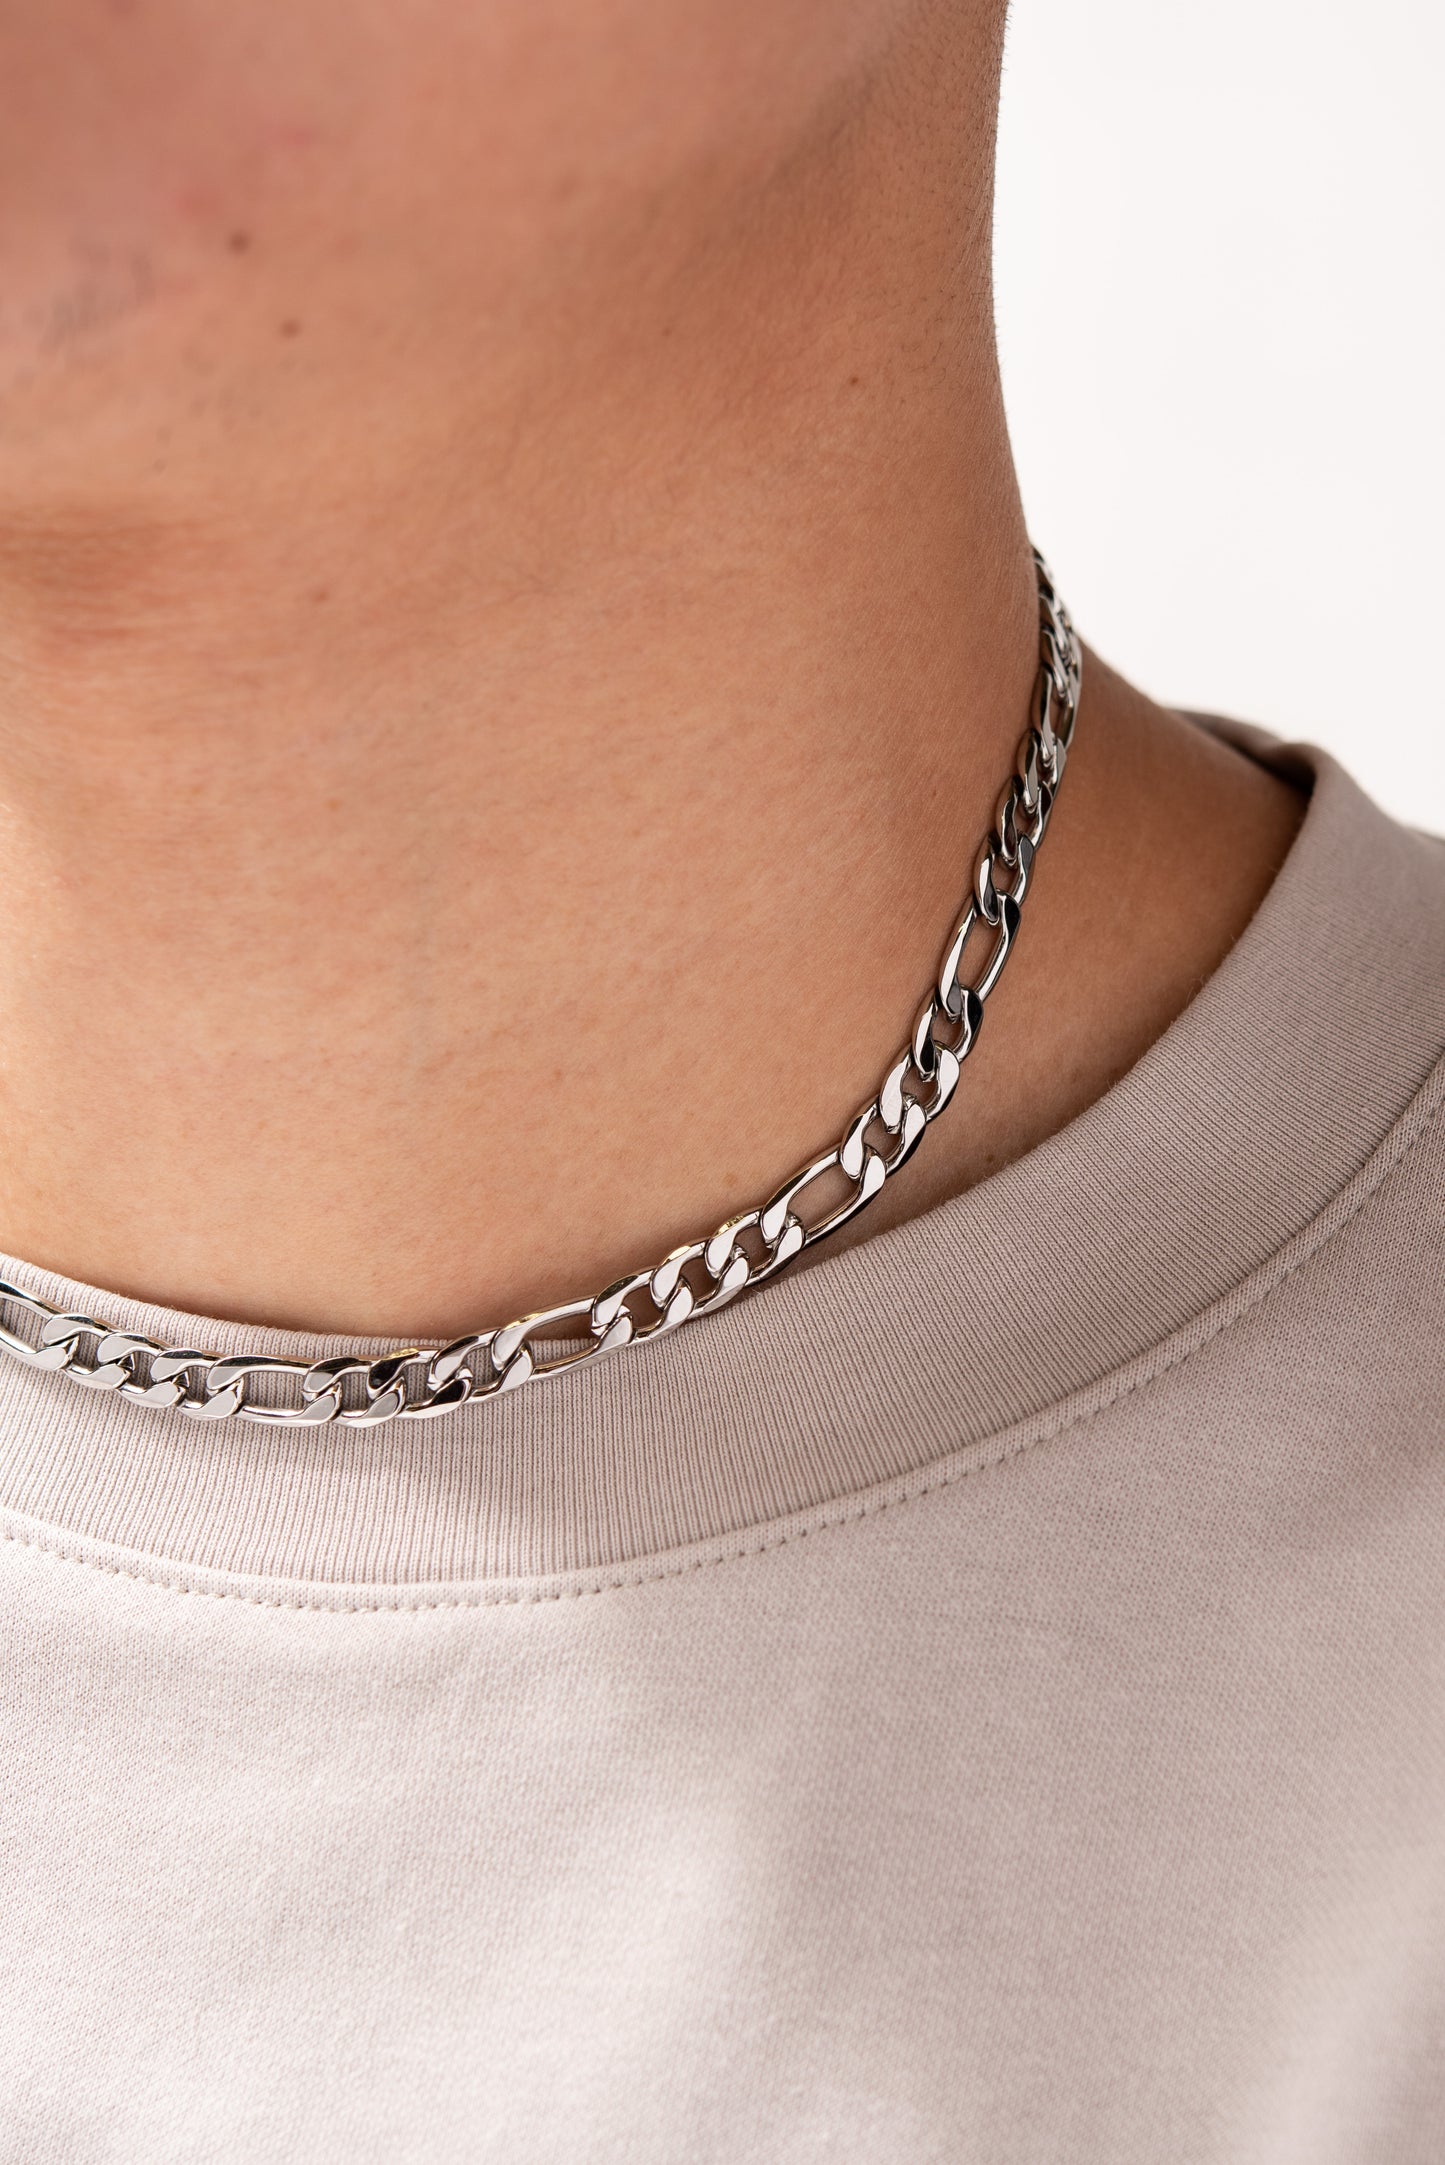 Stainless Steel Figaro Chain Necklace - Silver